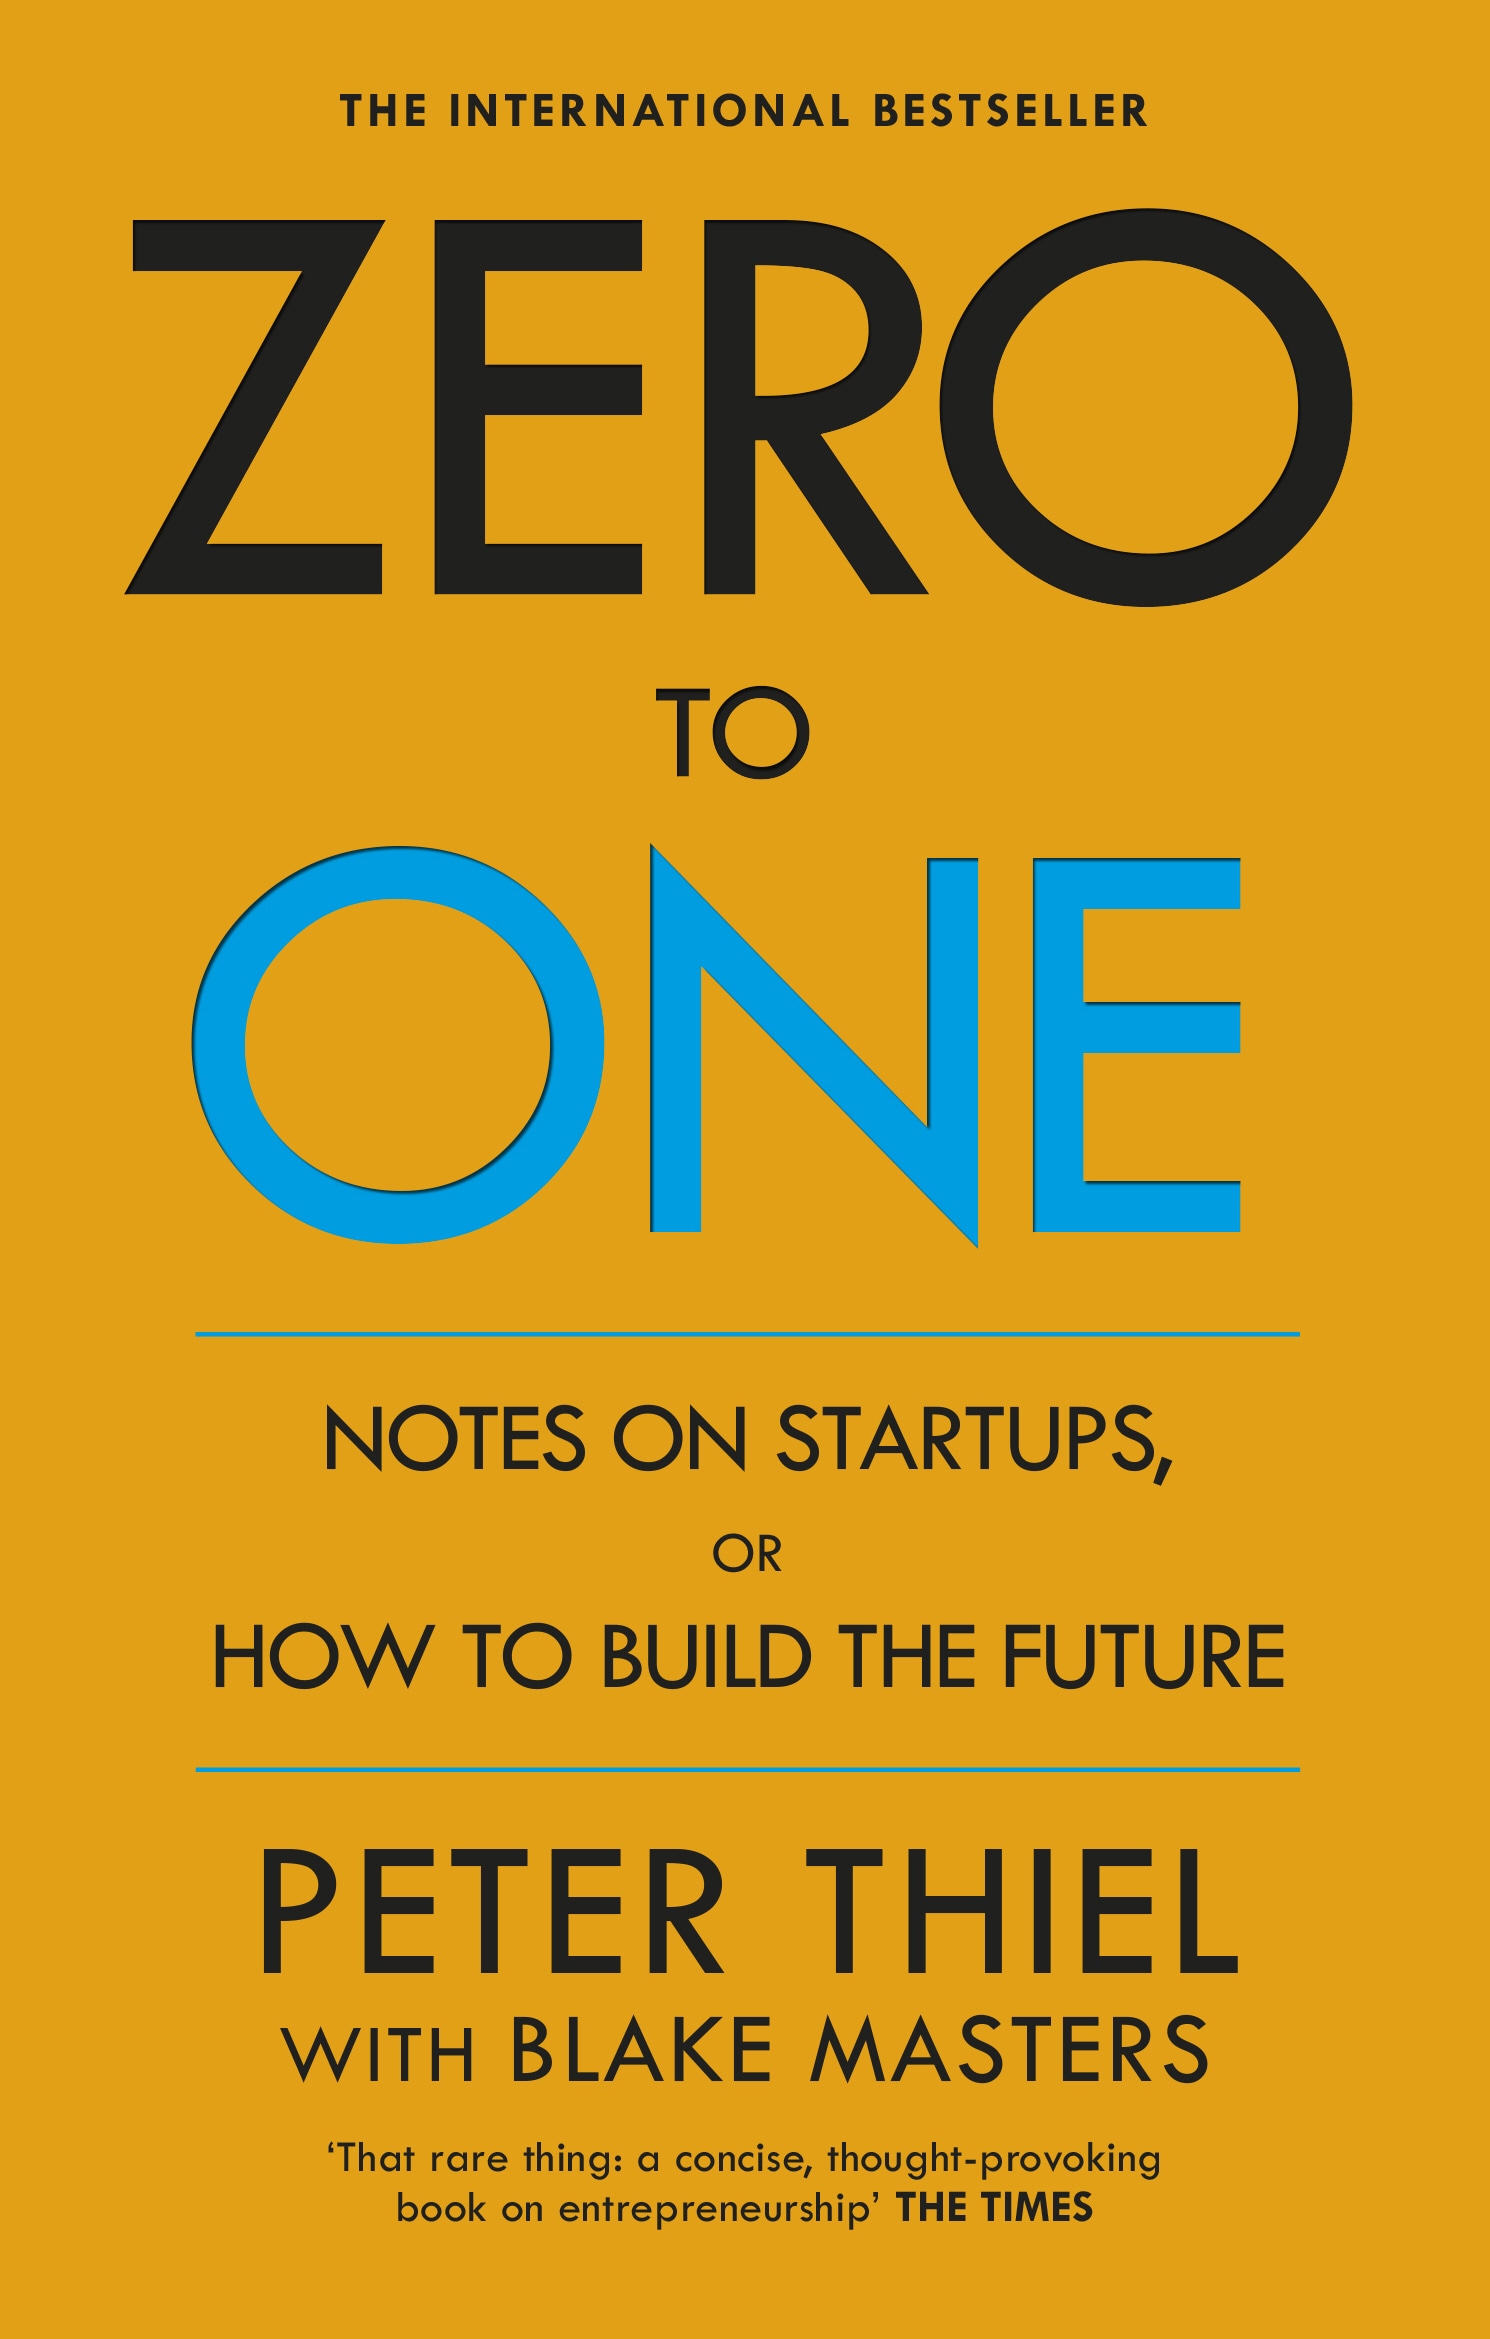 Book “Zero to One” by Blake Masters, Peter Thiel — June 4, 2015